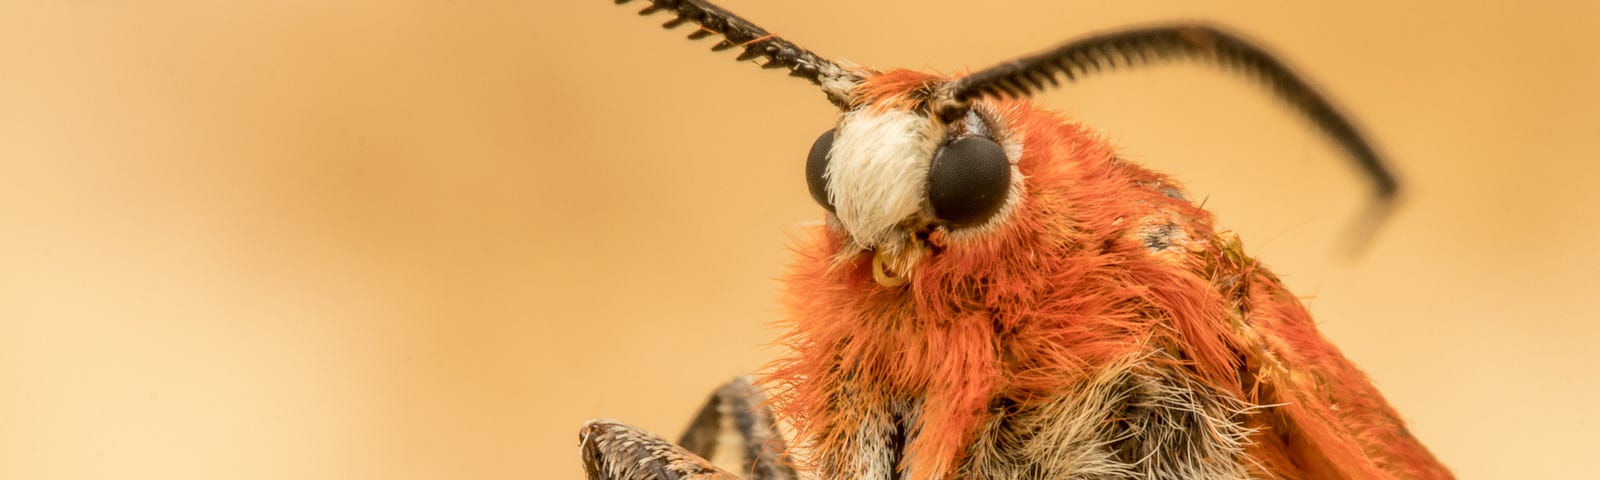 A close-up of a fuzzy moth, eyes looking at the camera